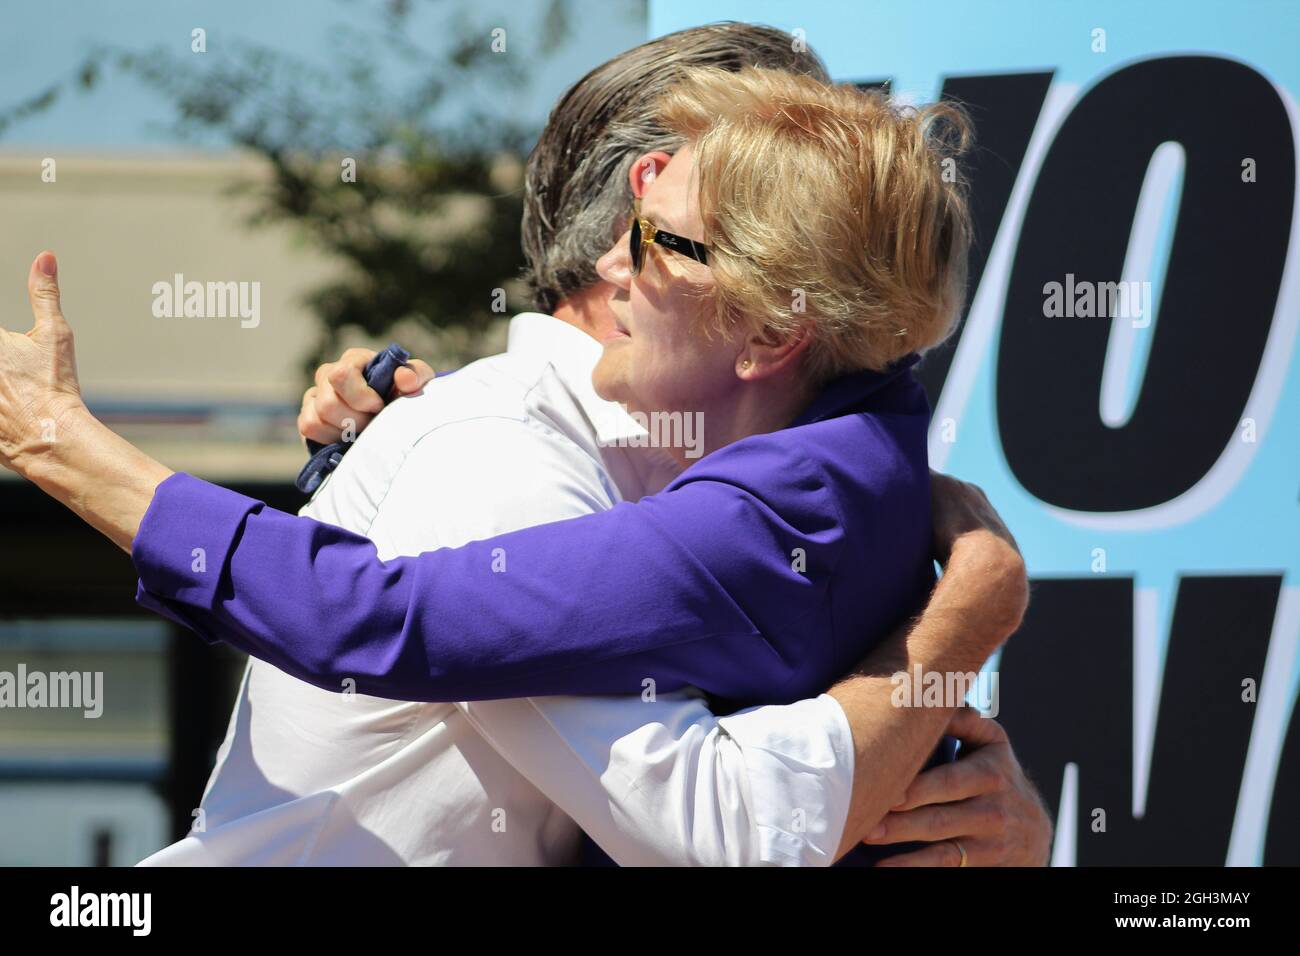 Los Angeles, USA. 04th Sep, 2021. Governor Gavin Newsom and Senator Elizabeth Warren at a 'Vote No' rally in Los Angeles, California on September 4, 2021. (Photo by Conor Duffy/Sipa USA) Credit: Sipa USA/Alamy Live News Stock Photo